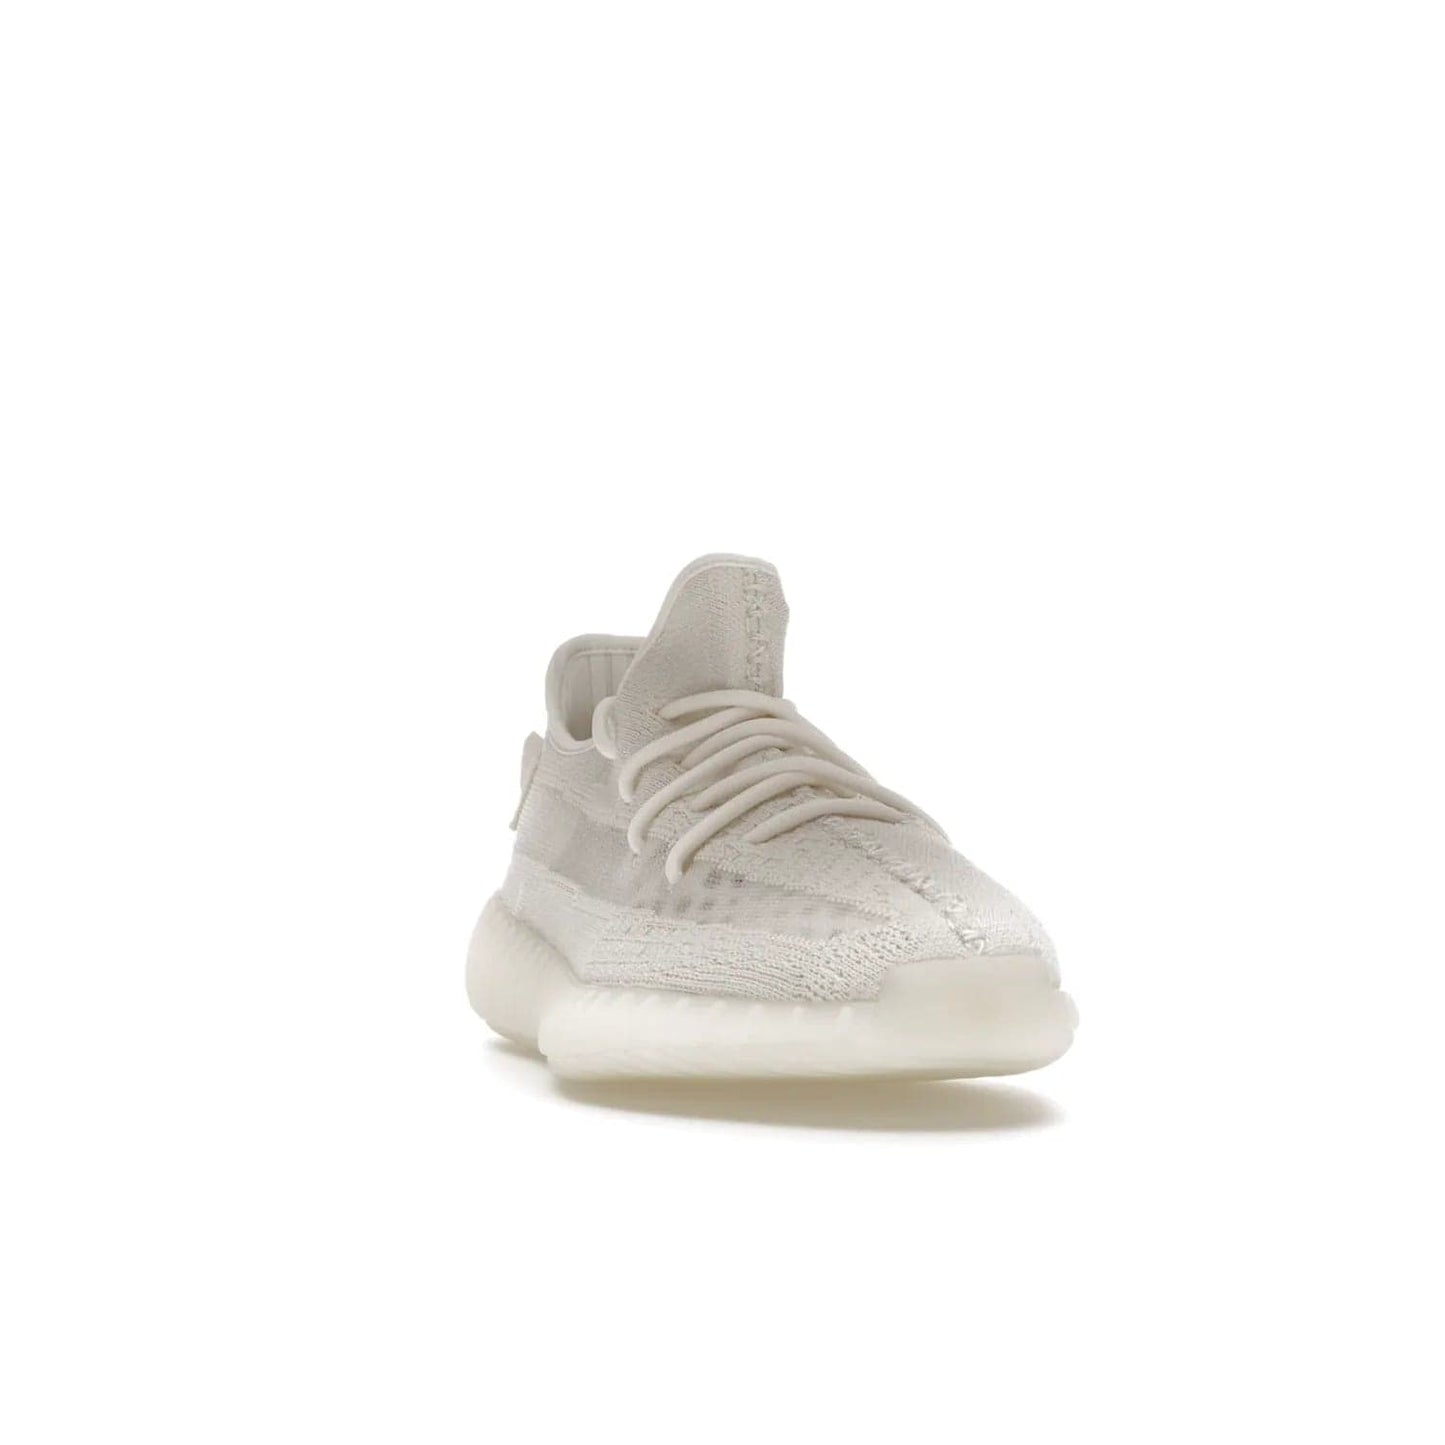 adidas Yeezy Boost 350 V2 Bone - Image 8 - Only at www.BallersClubKickz.com - Grab the stylish and comfortable adidas Yeezy Boost 350 V2 Bone in March 2022. This sneaker features a triple white Primeknit upper, mesh side stripes and canvas heel tabs, sitting atop a semi-translucent sole with Boost technology. Sure to keep your feet comfortable and stylish!